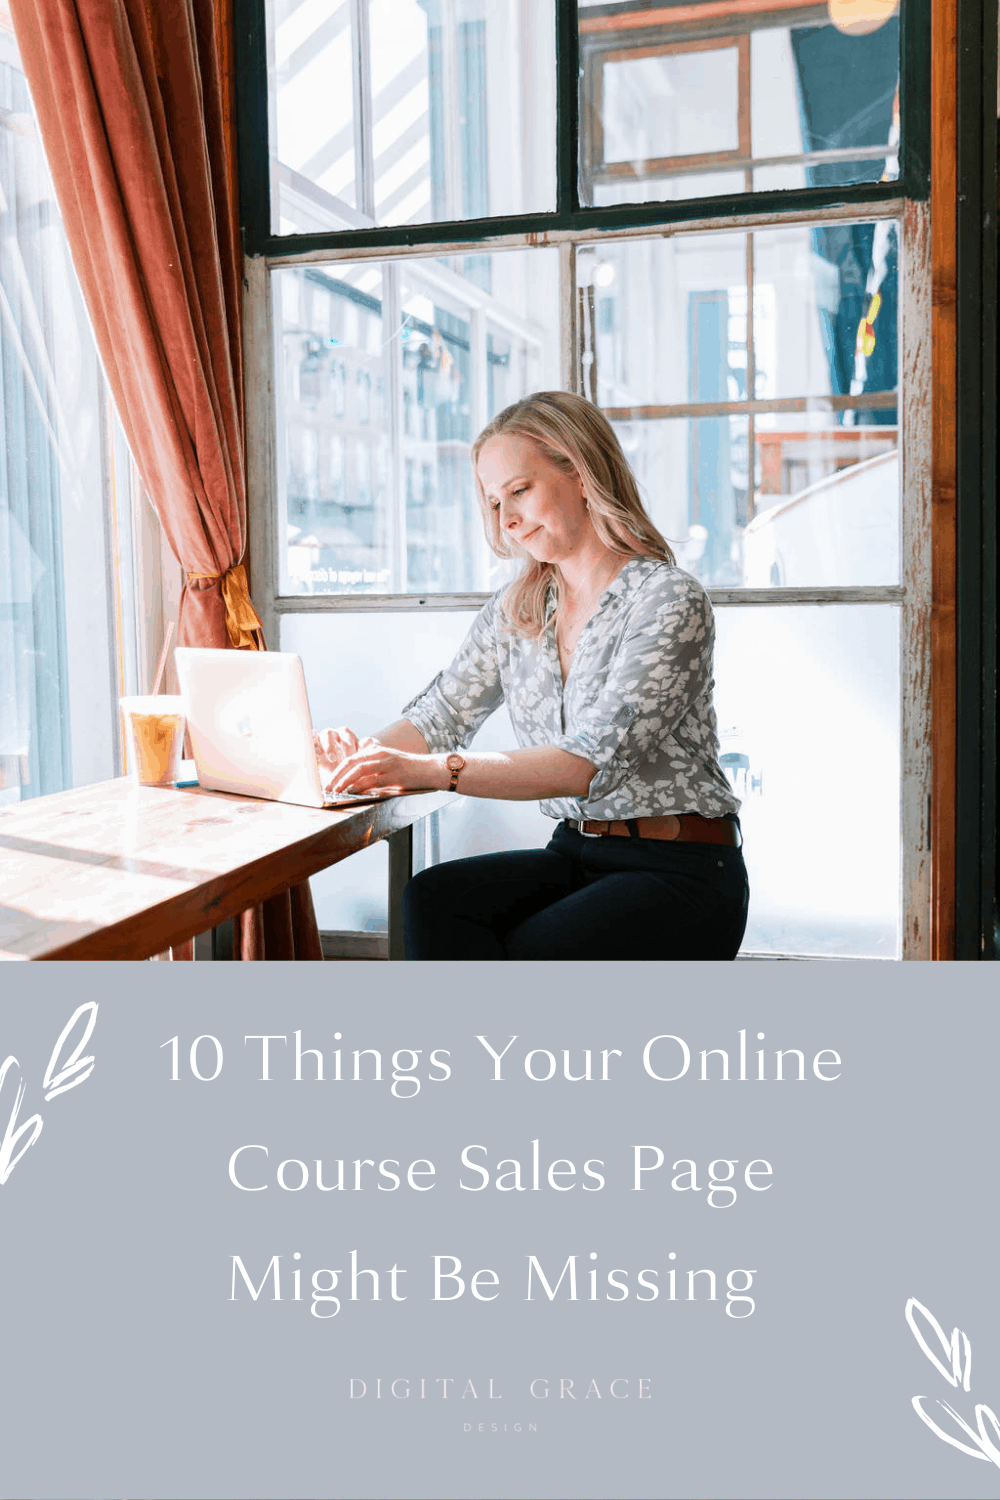 10 Things Your Online Course Sales Page Might Be Missing